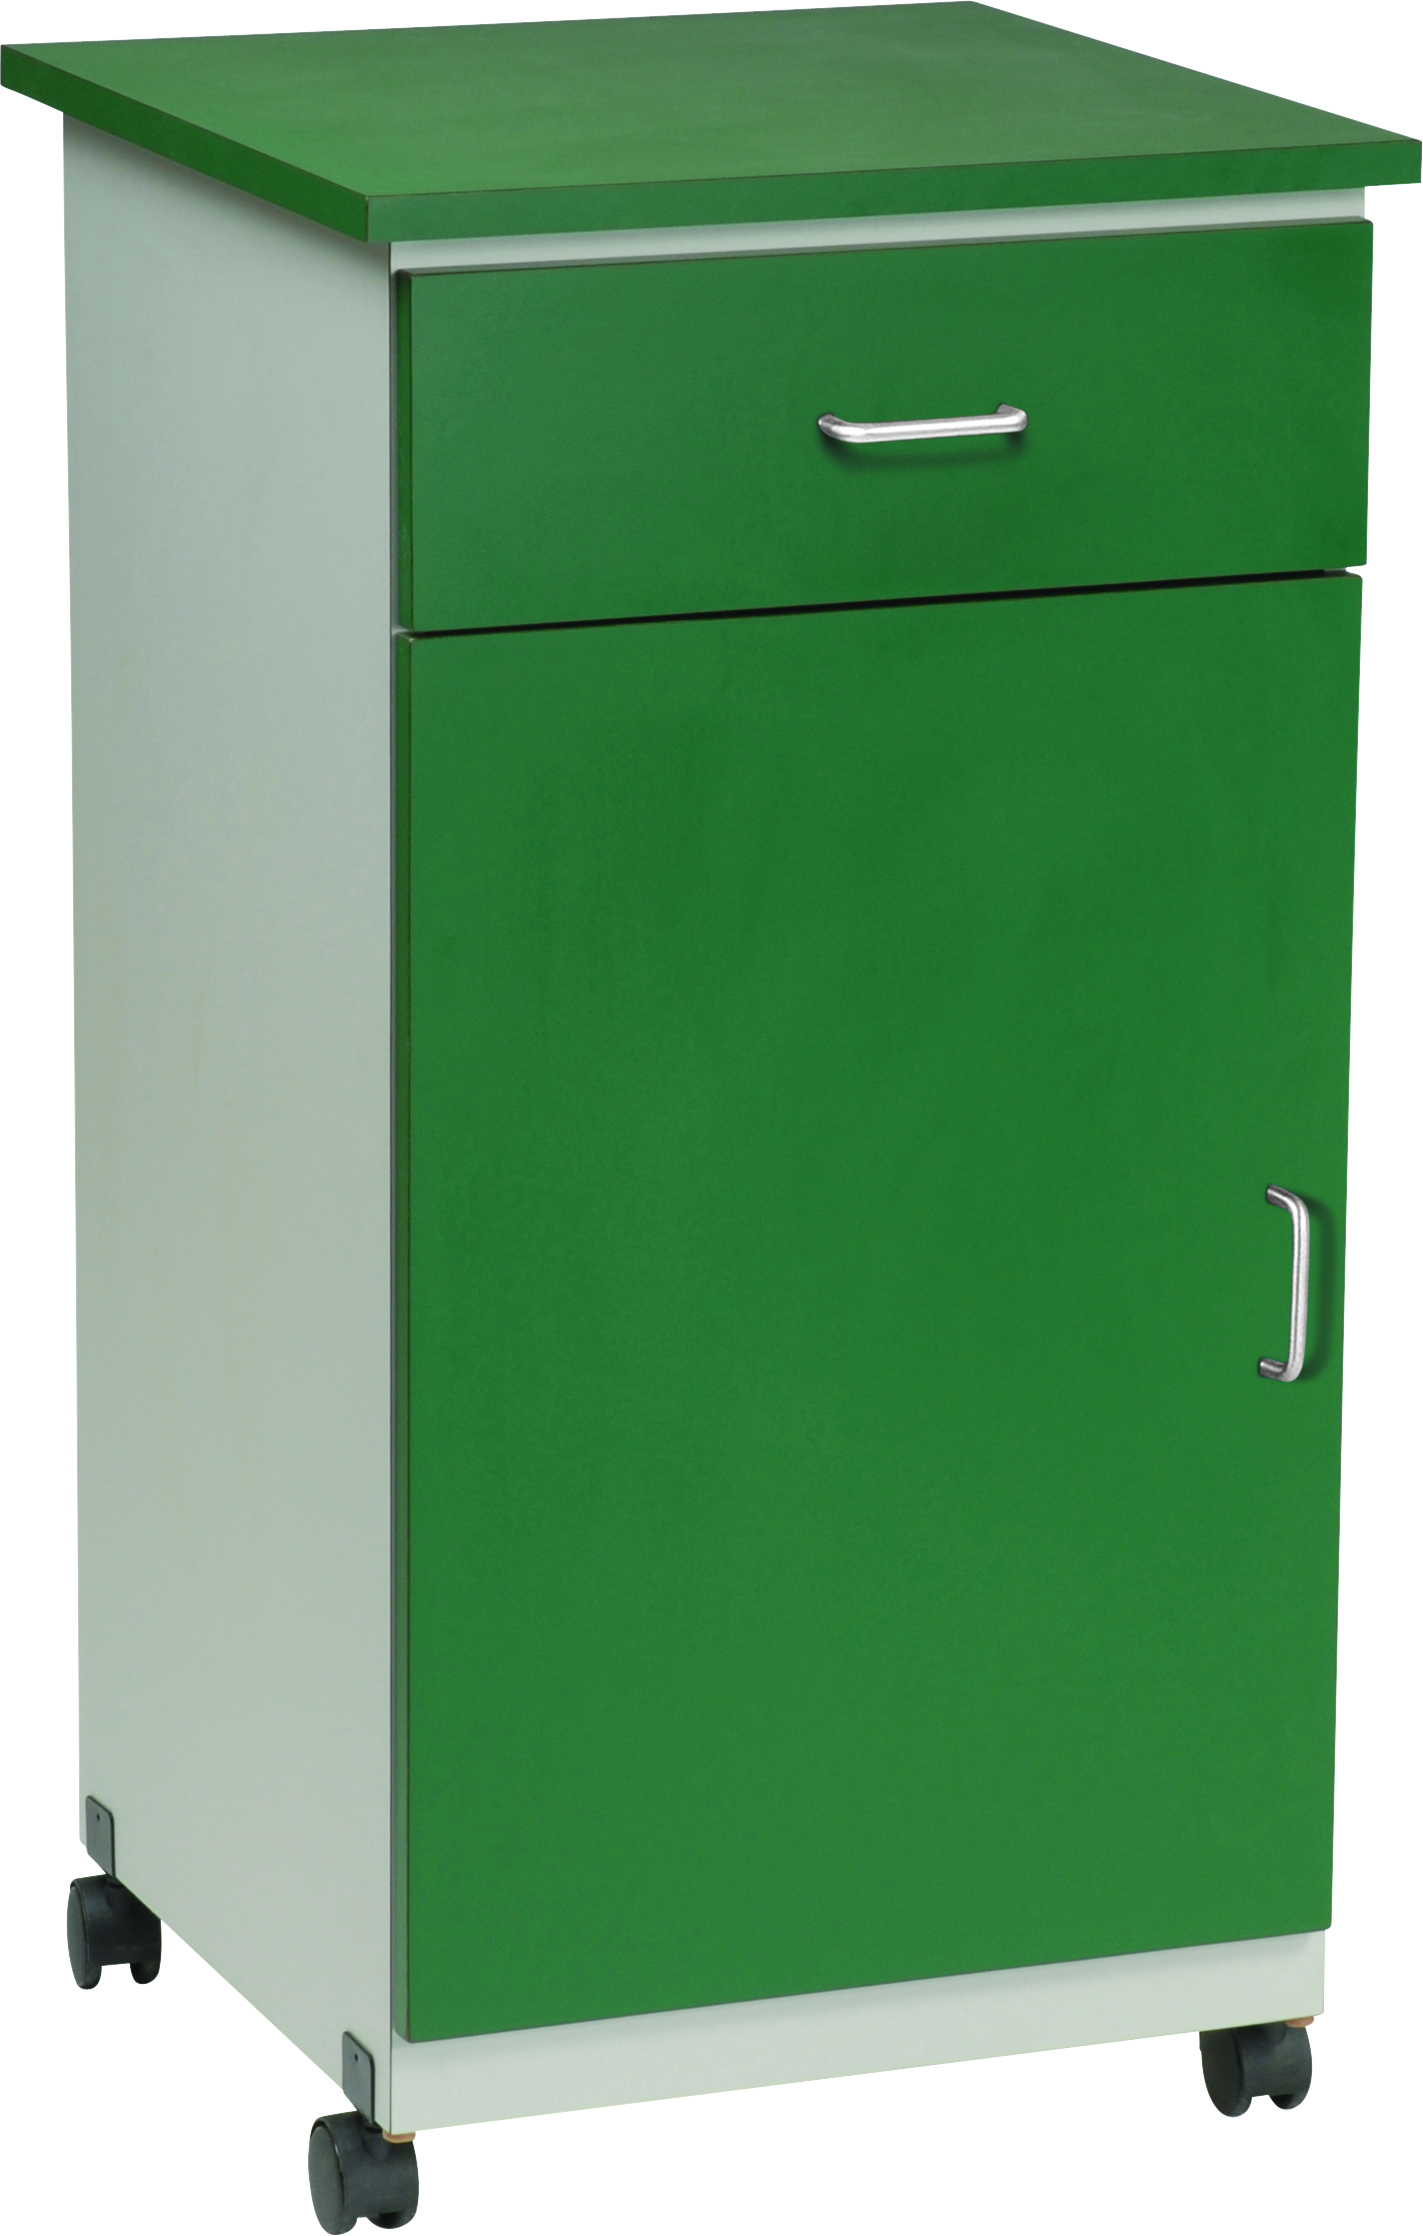 EX1D Series Express Cabinet express supply cabinet, express cabinet.